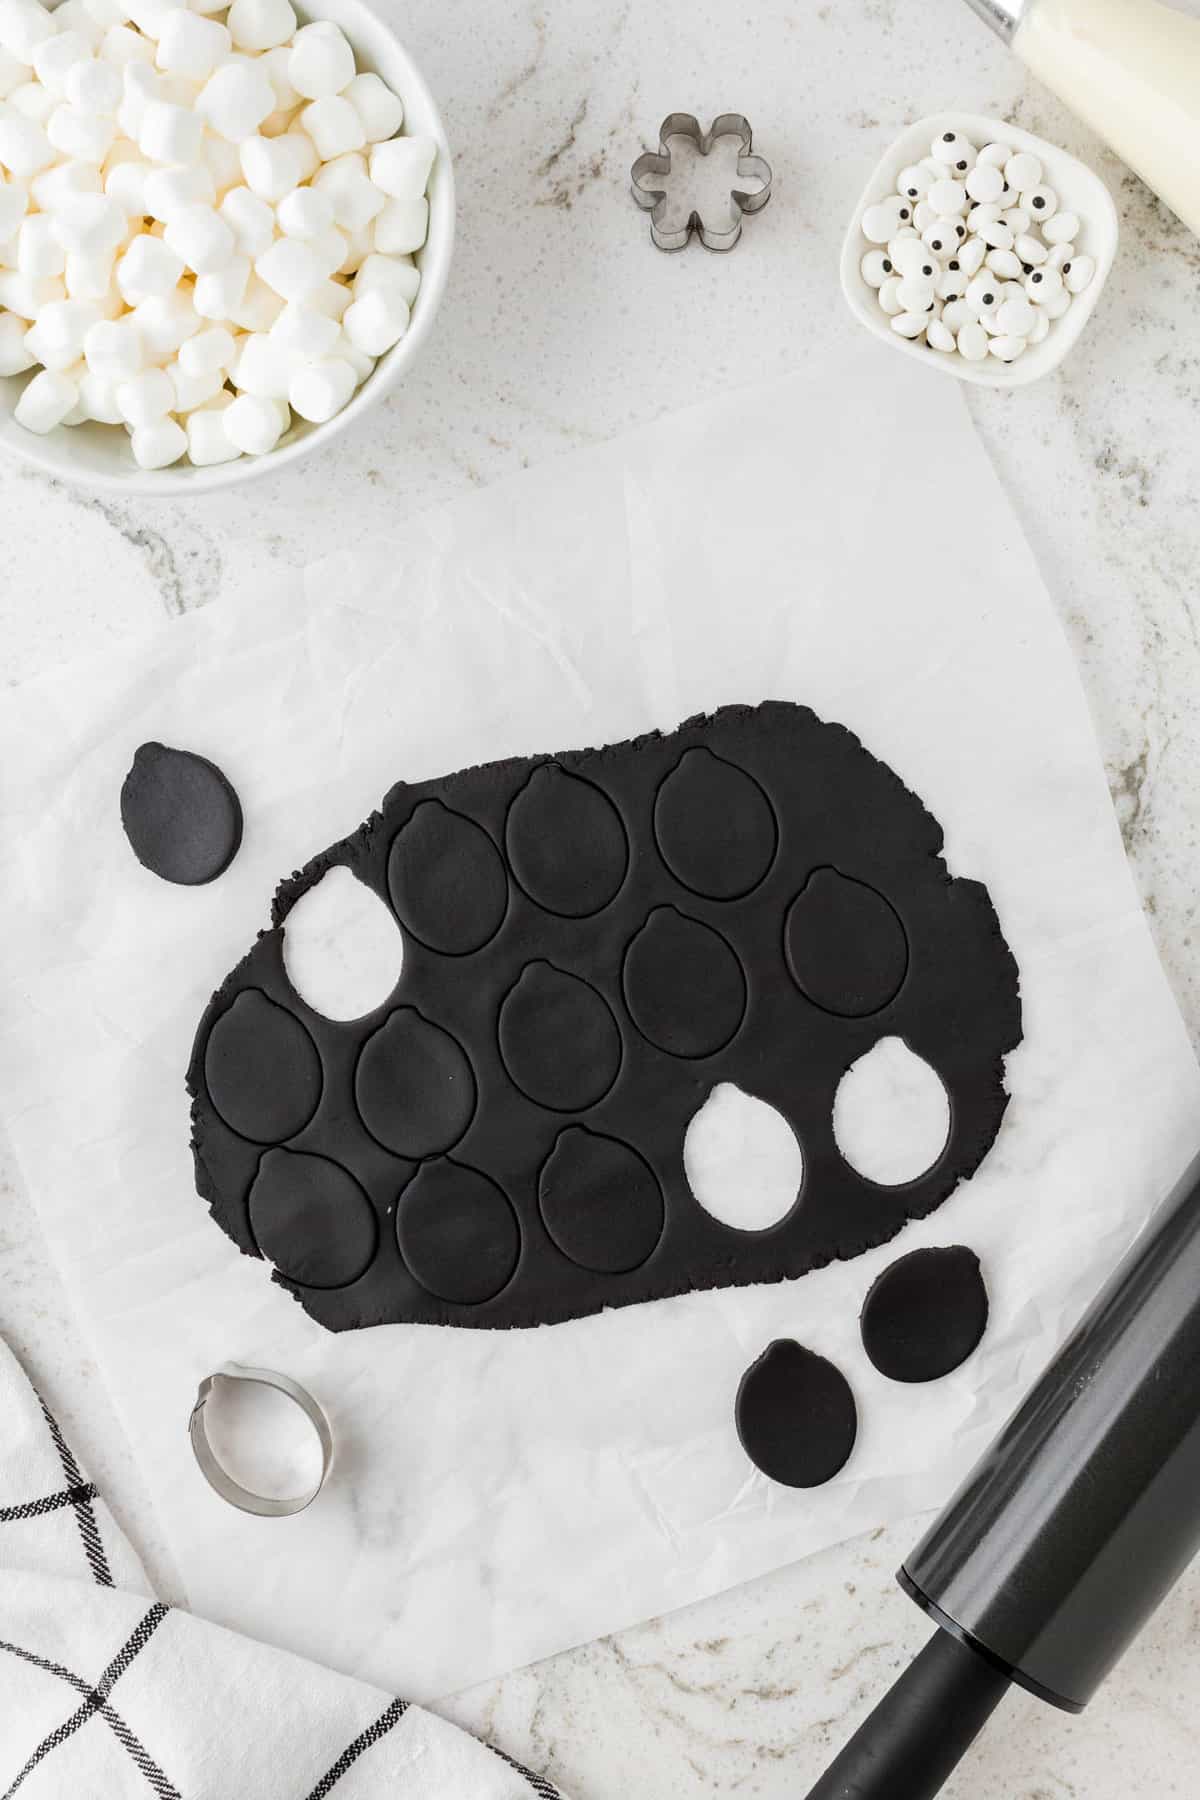 Roll out black fondant and use an oval cookie cutter to cut out the sheeps head.